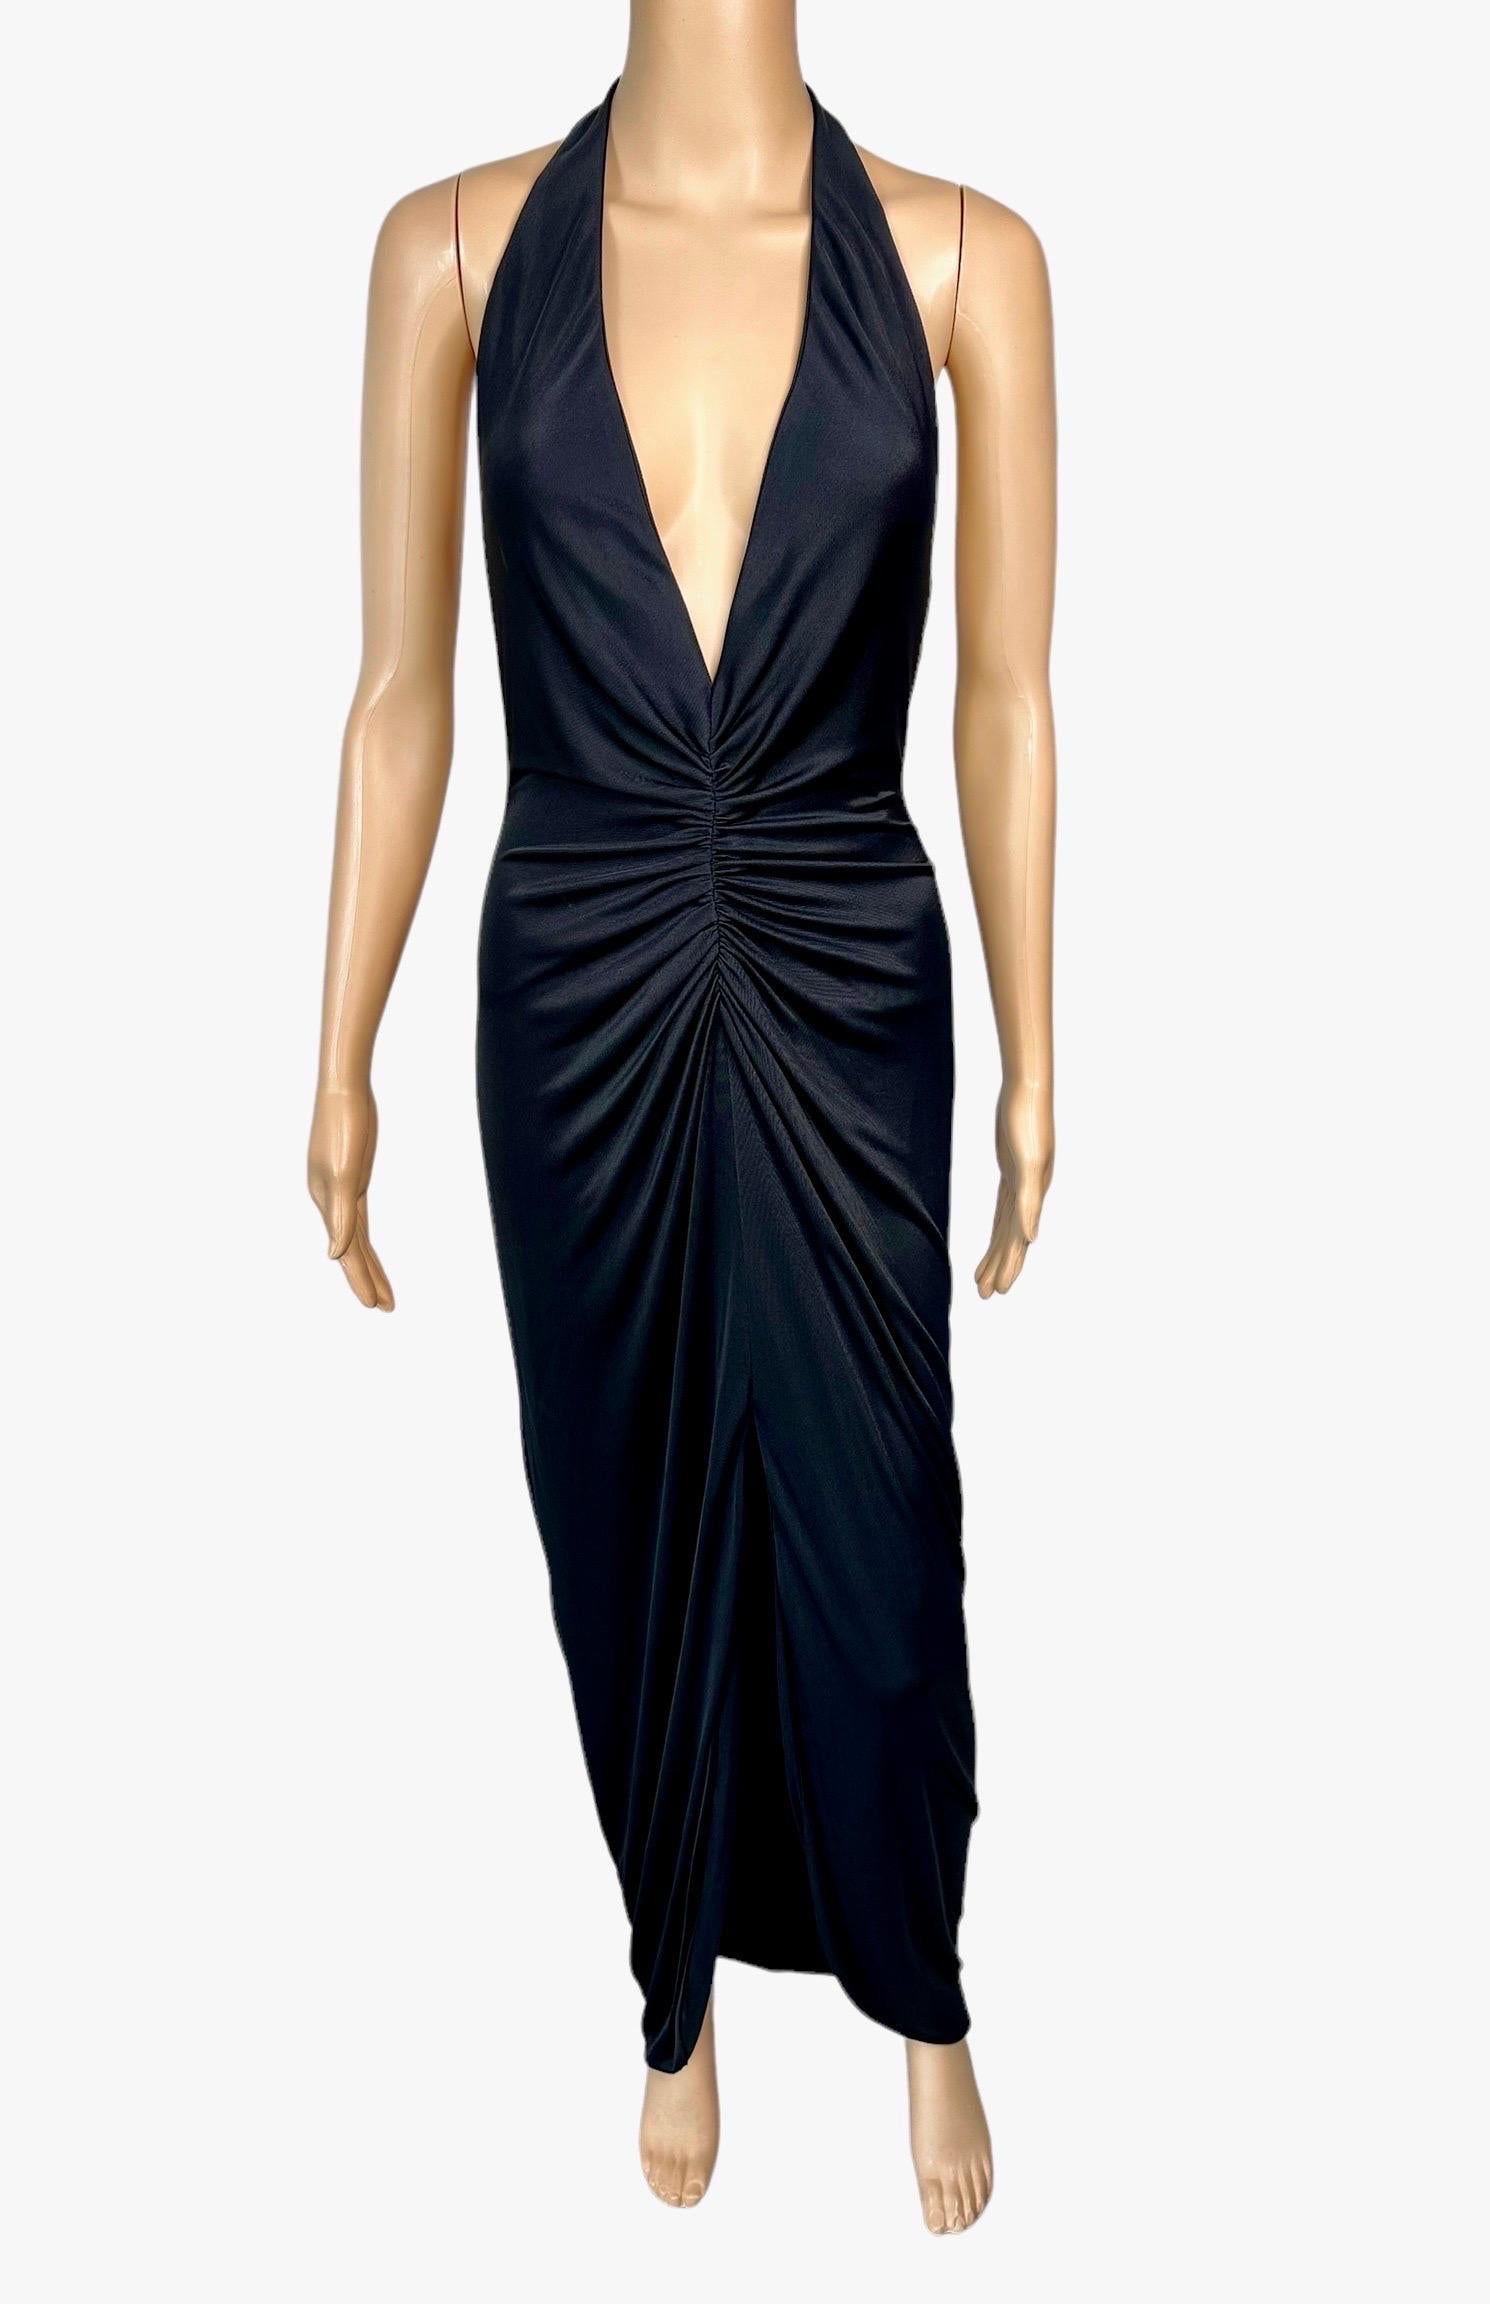 Versace S/S 2005 Runway Plunging Hi-Low Ruched Open Back Evening Dress Gown In Good Condition For Sale In Naples, FL